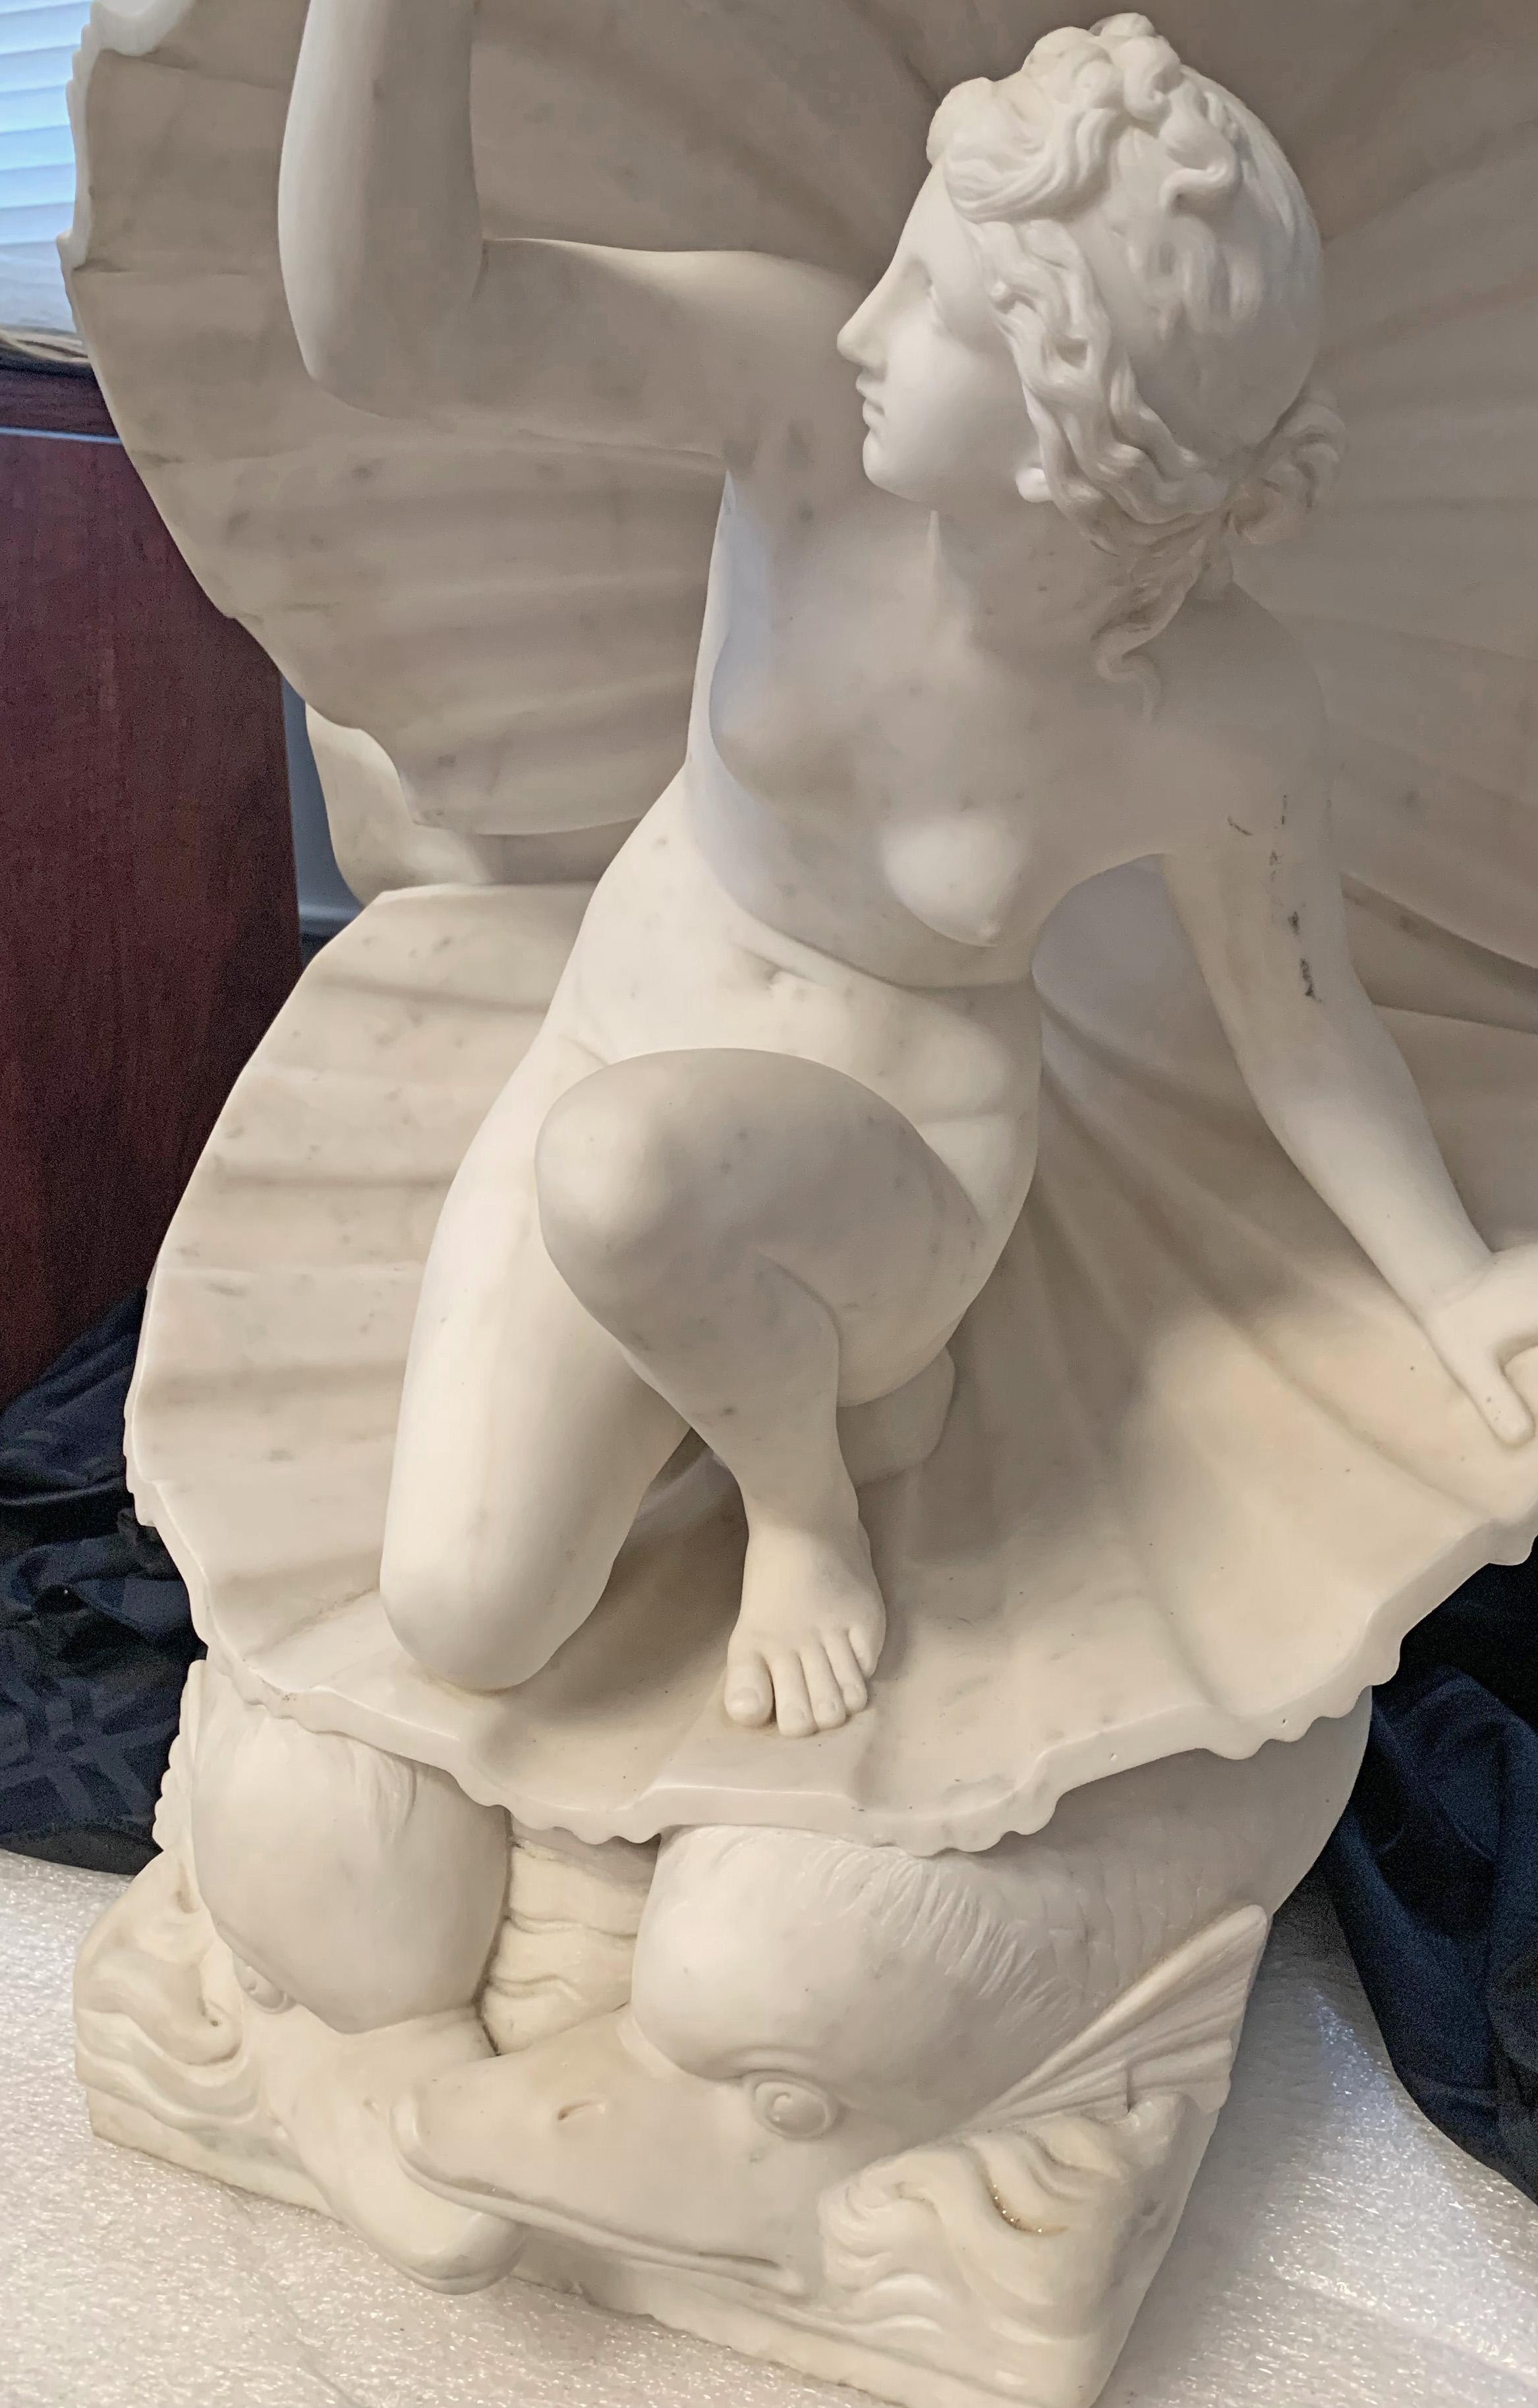 Exquisitely sculpted, probably by an Italian artist, this lovely and beautiful marble sculpture depicts a nude Venus figure emerging from a scallop shell, all supported by a pair of dolphins. The details of Venus' face, torso, hands and feet are